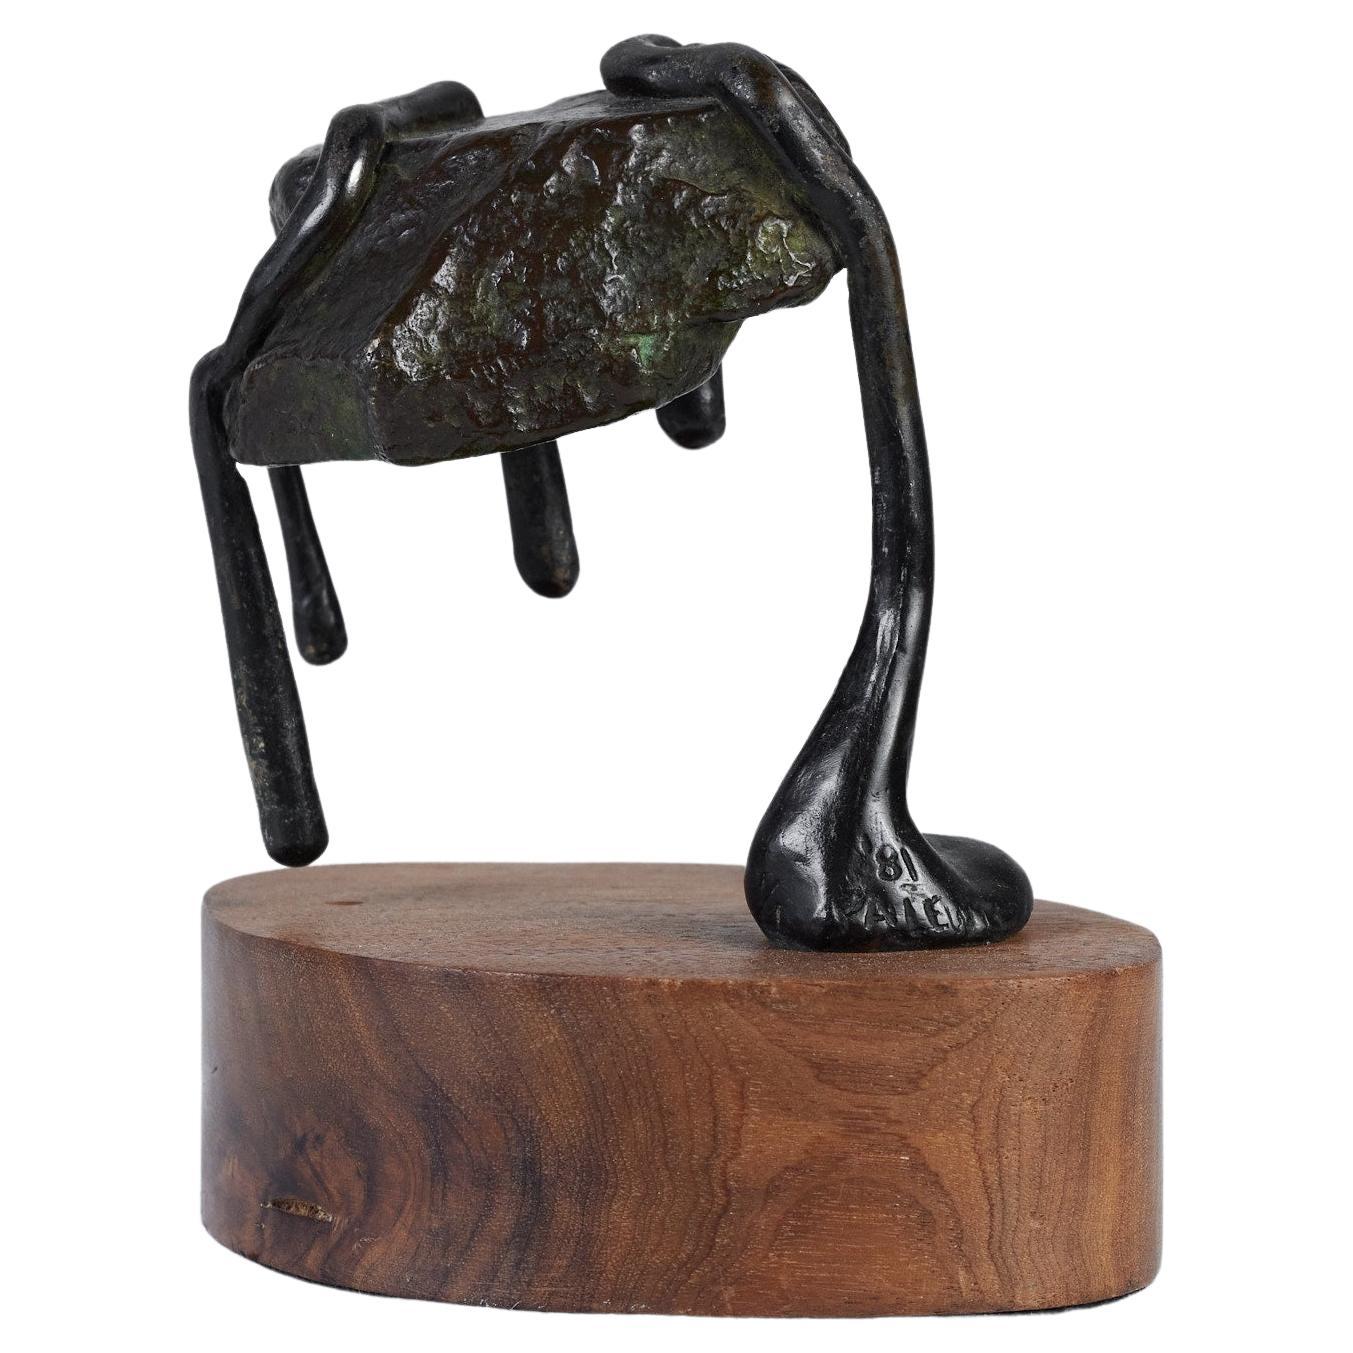 Mounted Abstract Bronze Sculpture